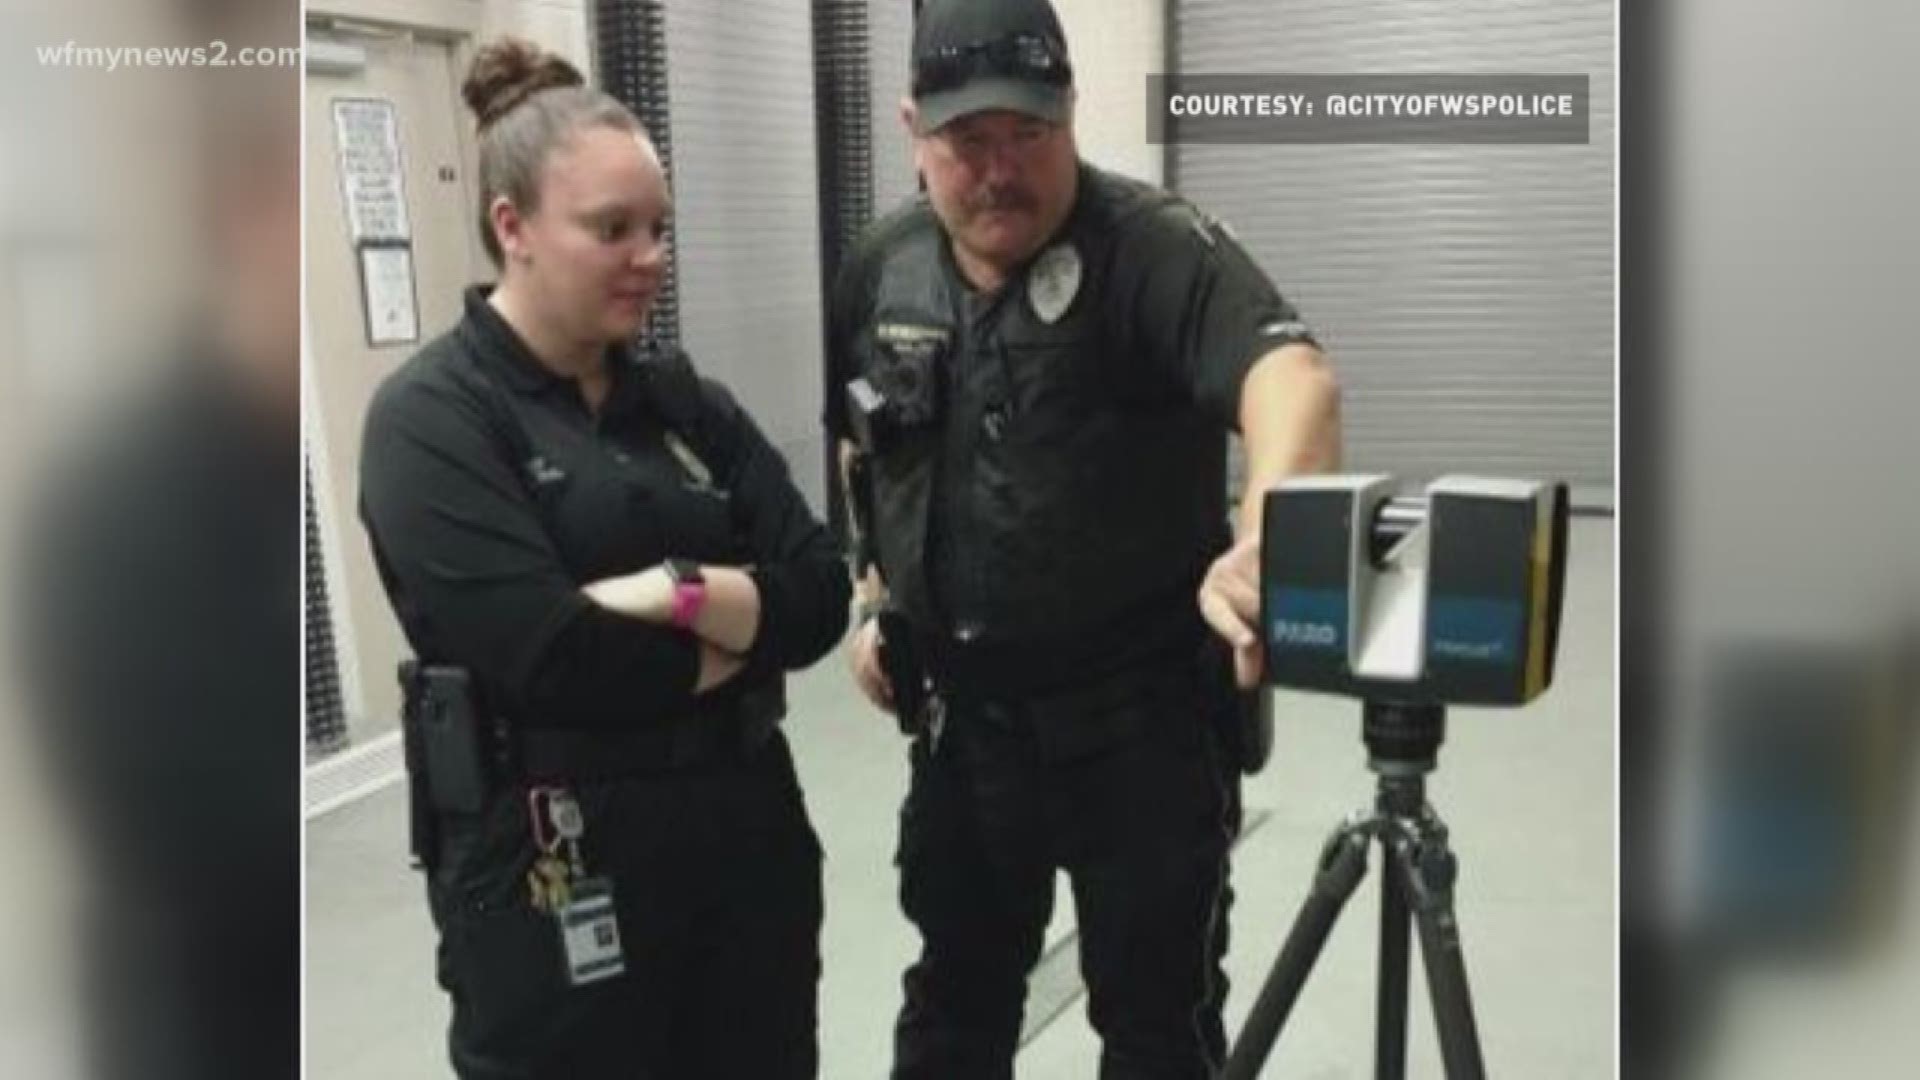 The new tools will help officers investigate crime scenes.